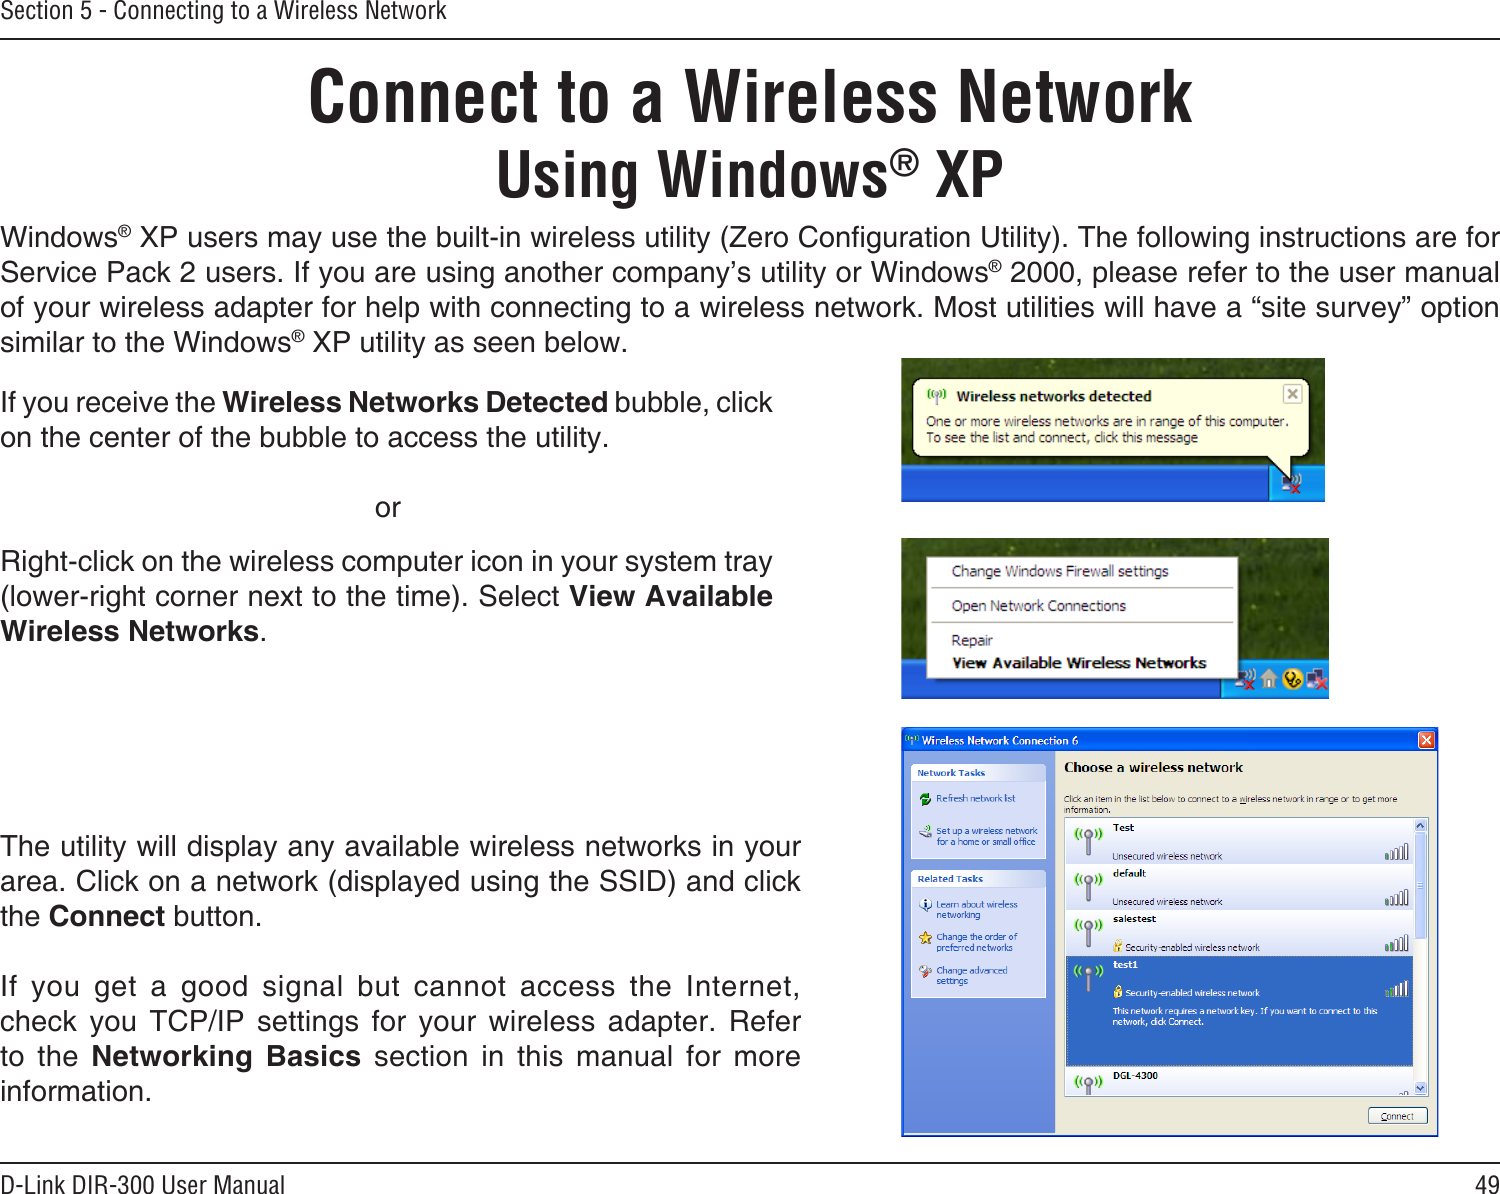 49D-Link DIR-300 User ManualSection 5 - Connecting to a Wireless NetworkConnect to a Wireless NetworkUsing Windows® XPWindows® XP users may use the built-in wireless utility (Zero Conguration Utility). The following instructions are for Service Pack 2 users. If you are using another company’s utility or Windows® 2000, please refer to the user manual of your wireless adapter for help with connecting to a wireless network. Most utilities will have a “site survey” option similar to the Windows® XP utility as seen below.Right-click on the wireless computer icon in your system tray (lower-right corner next to the time). Select View Available Wireless Networks.If you receive the Wireless Networks Detected bubble, click on the center of the bubble to access the utility.     orThe utility will display any available wireless networks in your area. Click on a network (displayed using the SSID) and click the Connect button.If  you  get  a  good  signal  but  cannot  access  the  Internet, check  you  TCP/IP  settings  for  your  wireless  adapter.  Refer to  the  Networking  Basics  section  in  this  manual  for  more information.